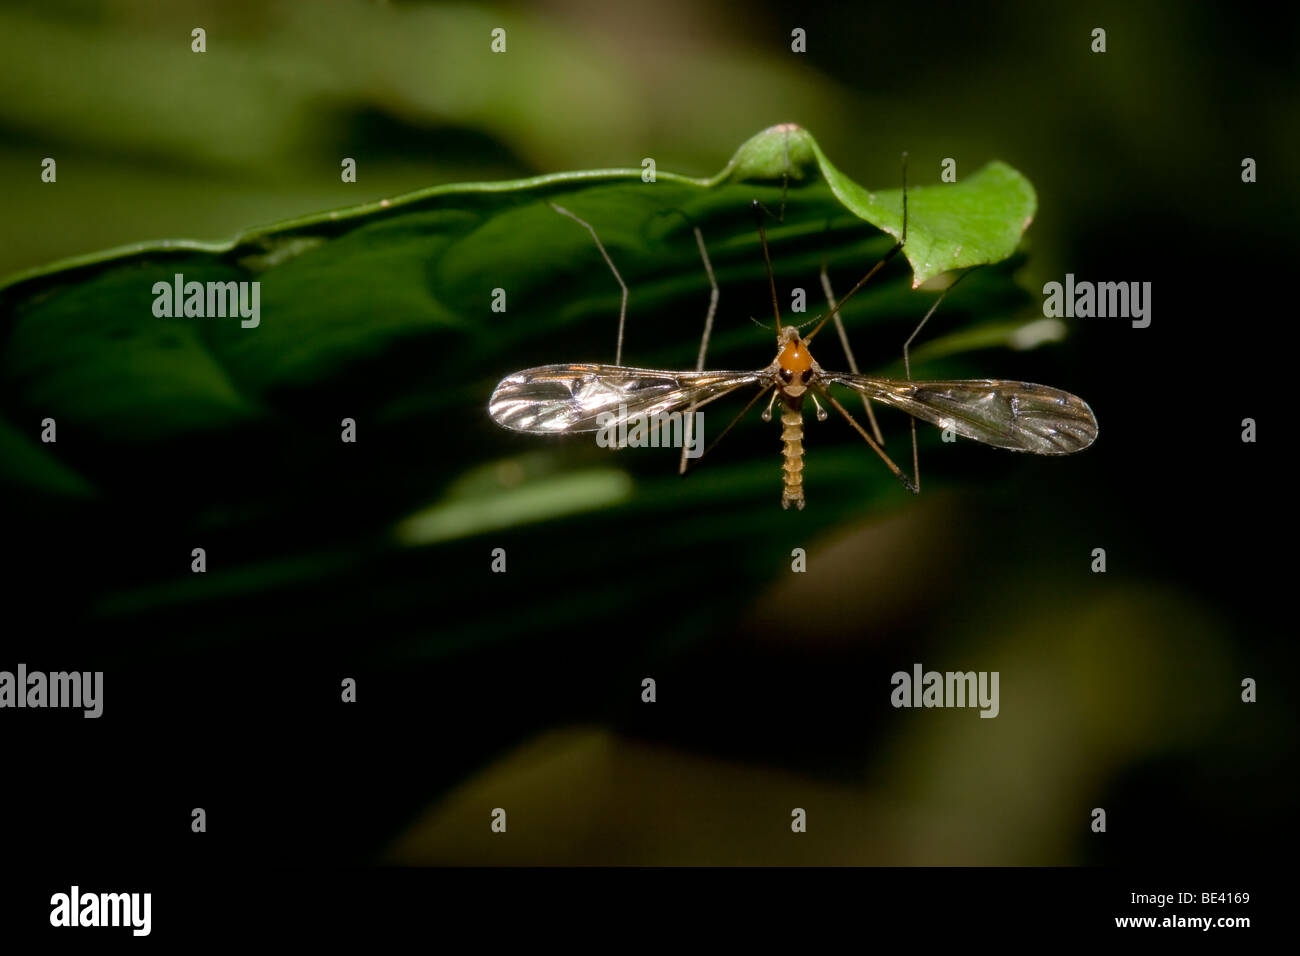 Crane fly, family Tipulidae, order Diptera. Photographed in Costa Rica. Stock Photo